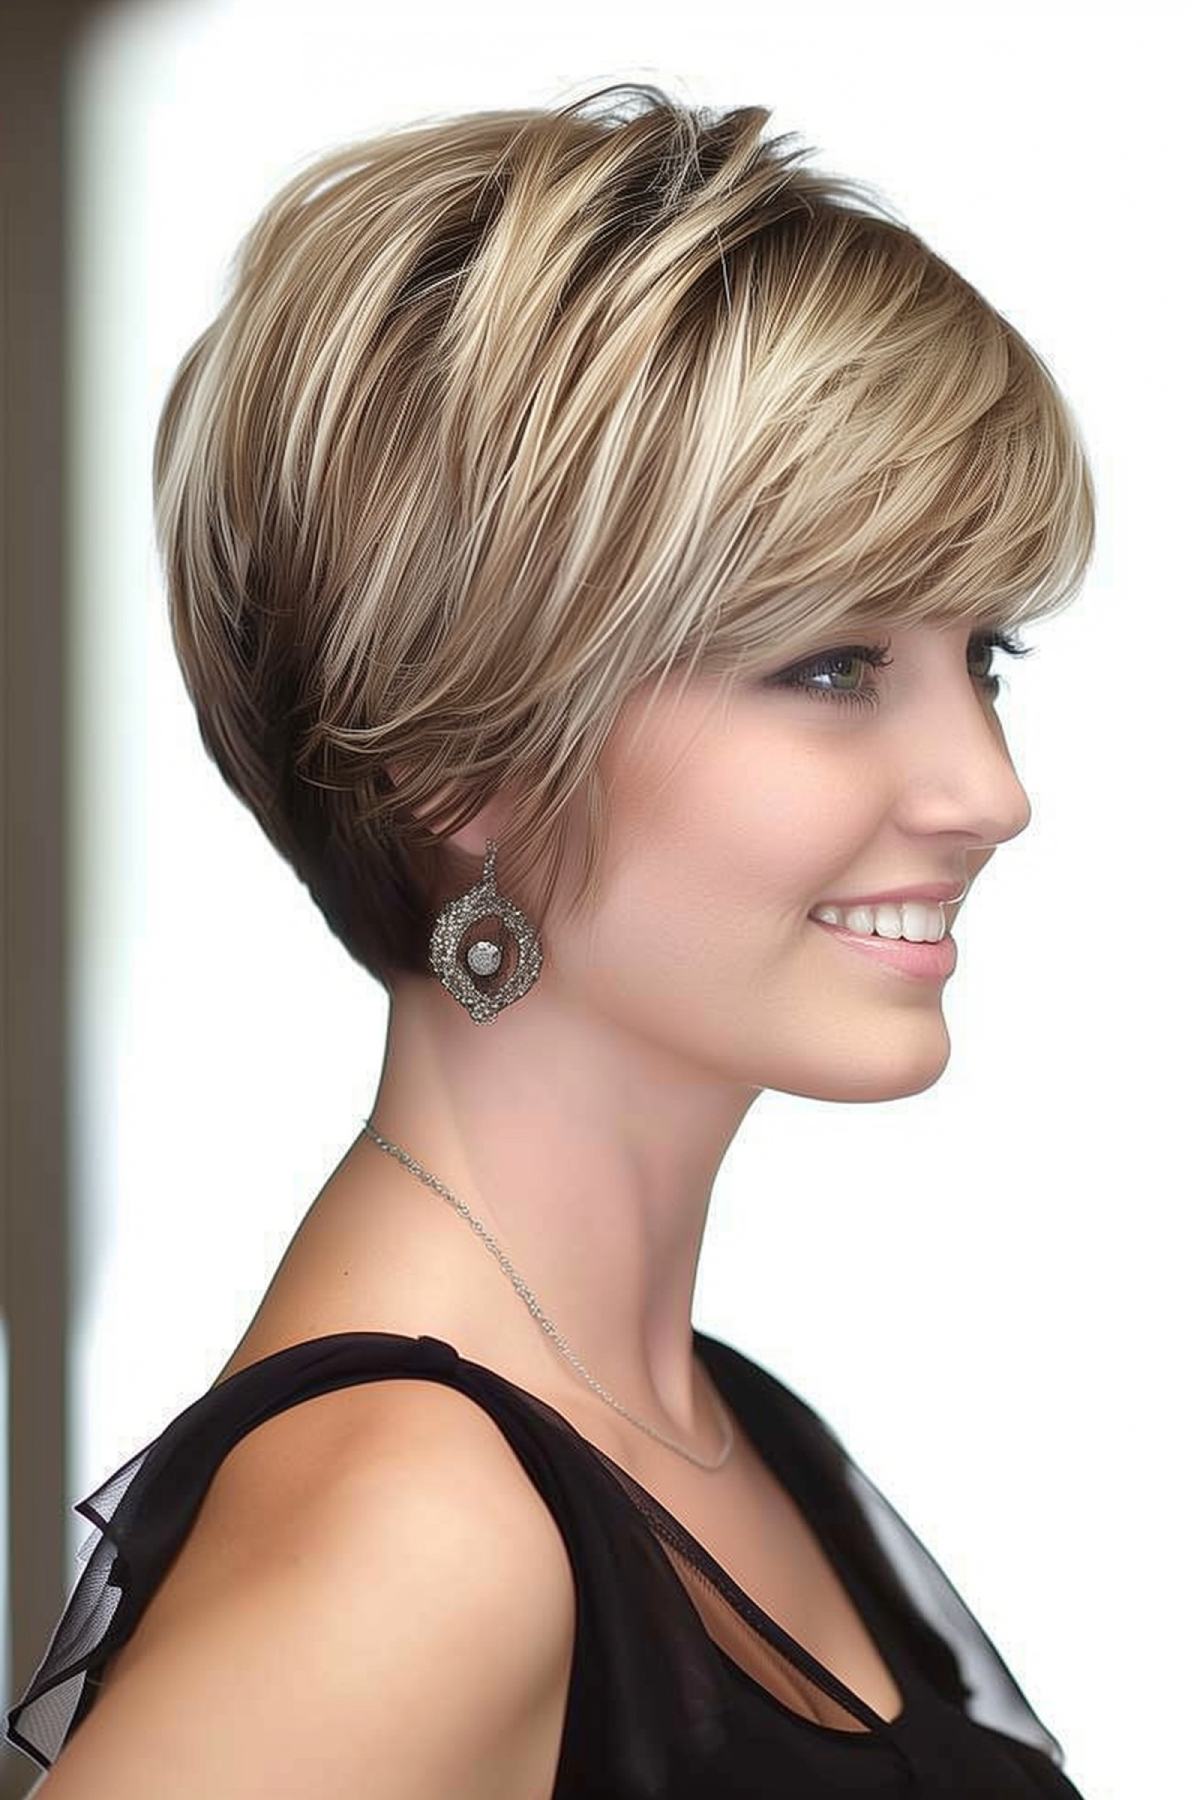 Short Wedge Haircut with Side-Swept Bangs and Blonde Highlights